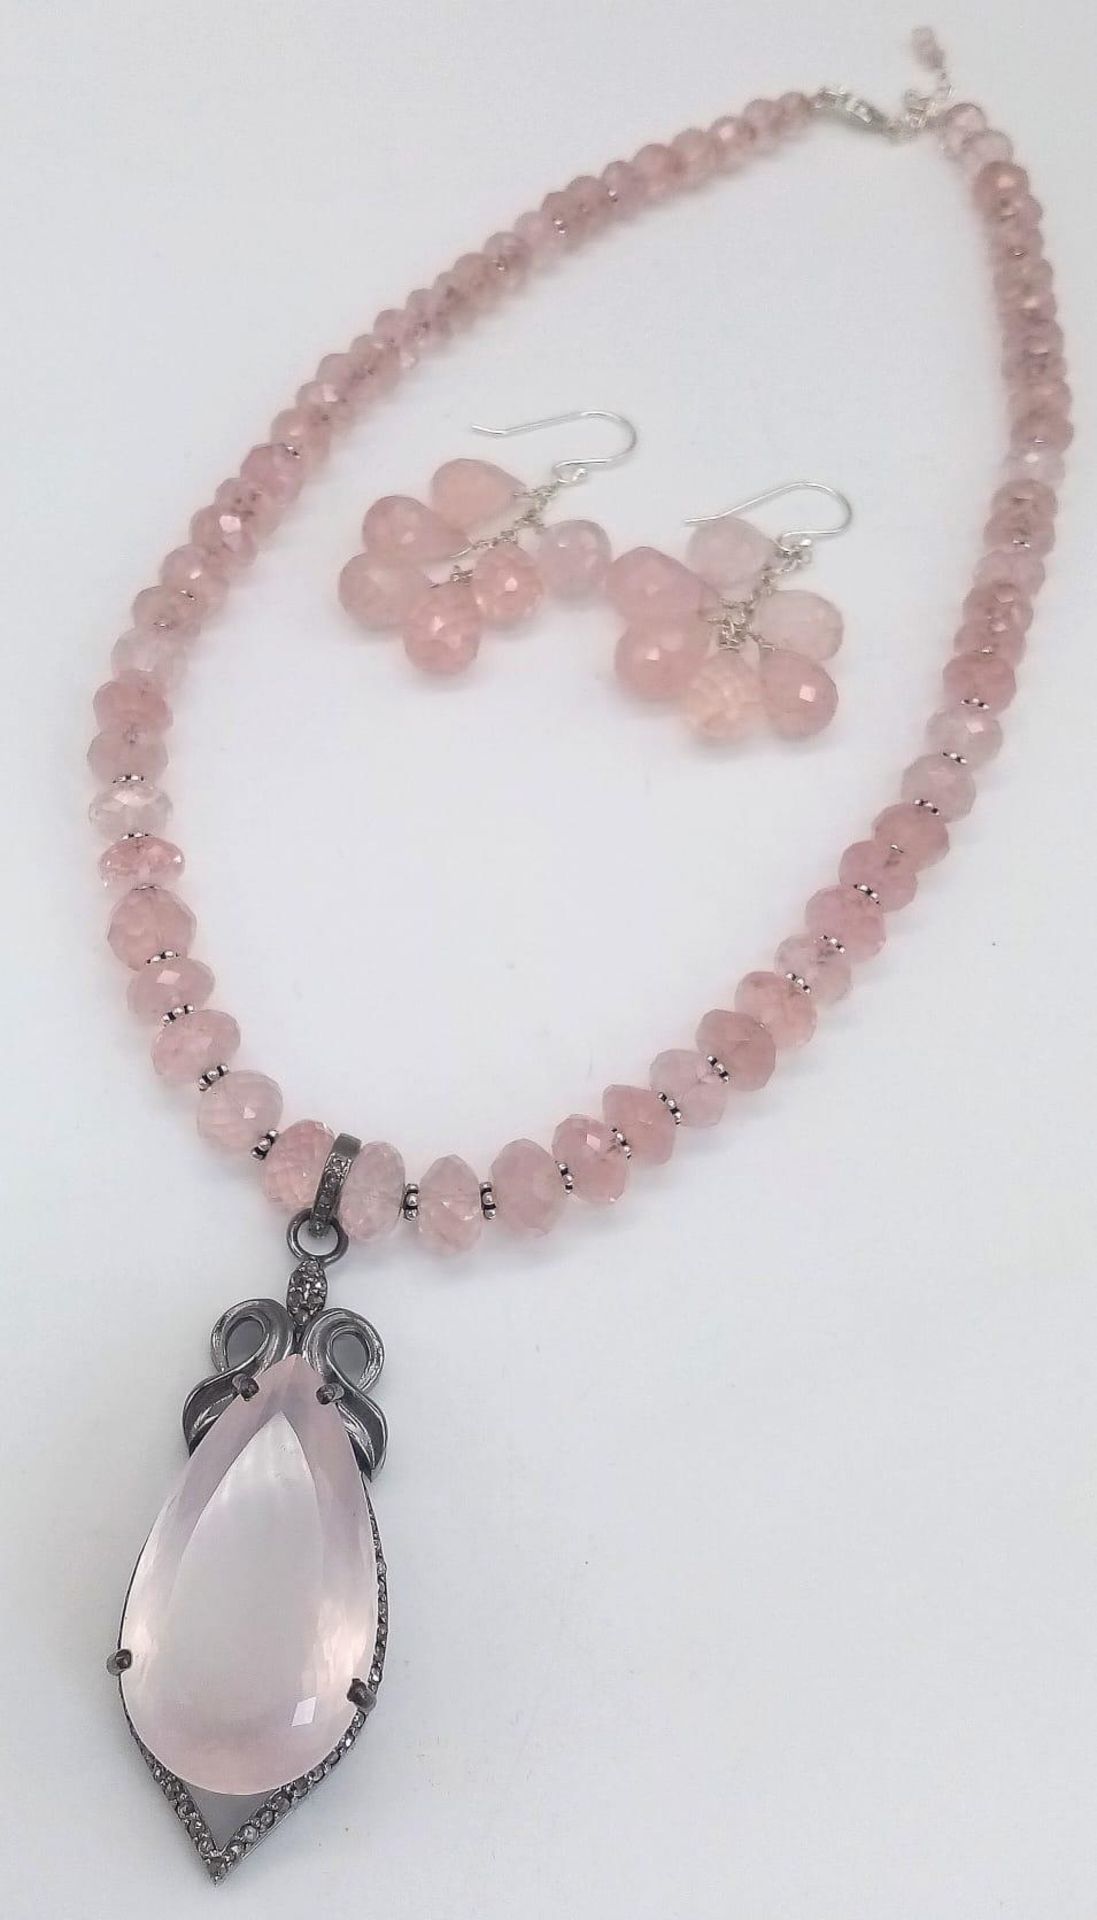 Rose Quartz Gemstone Necklace with Pendant with Diamonds on 925 Silver, The Pendant Comes with